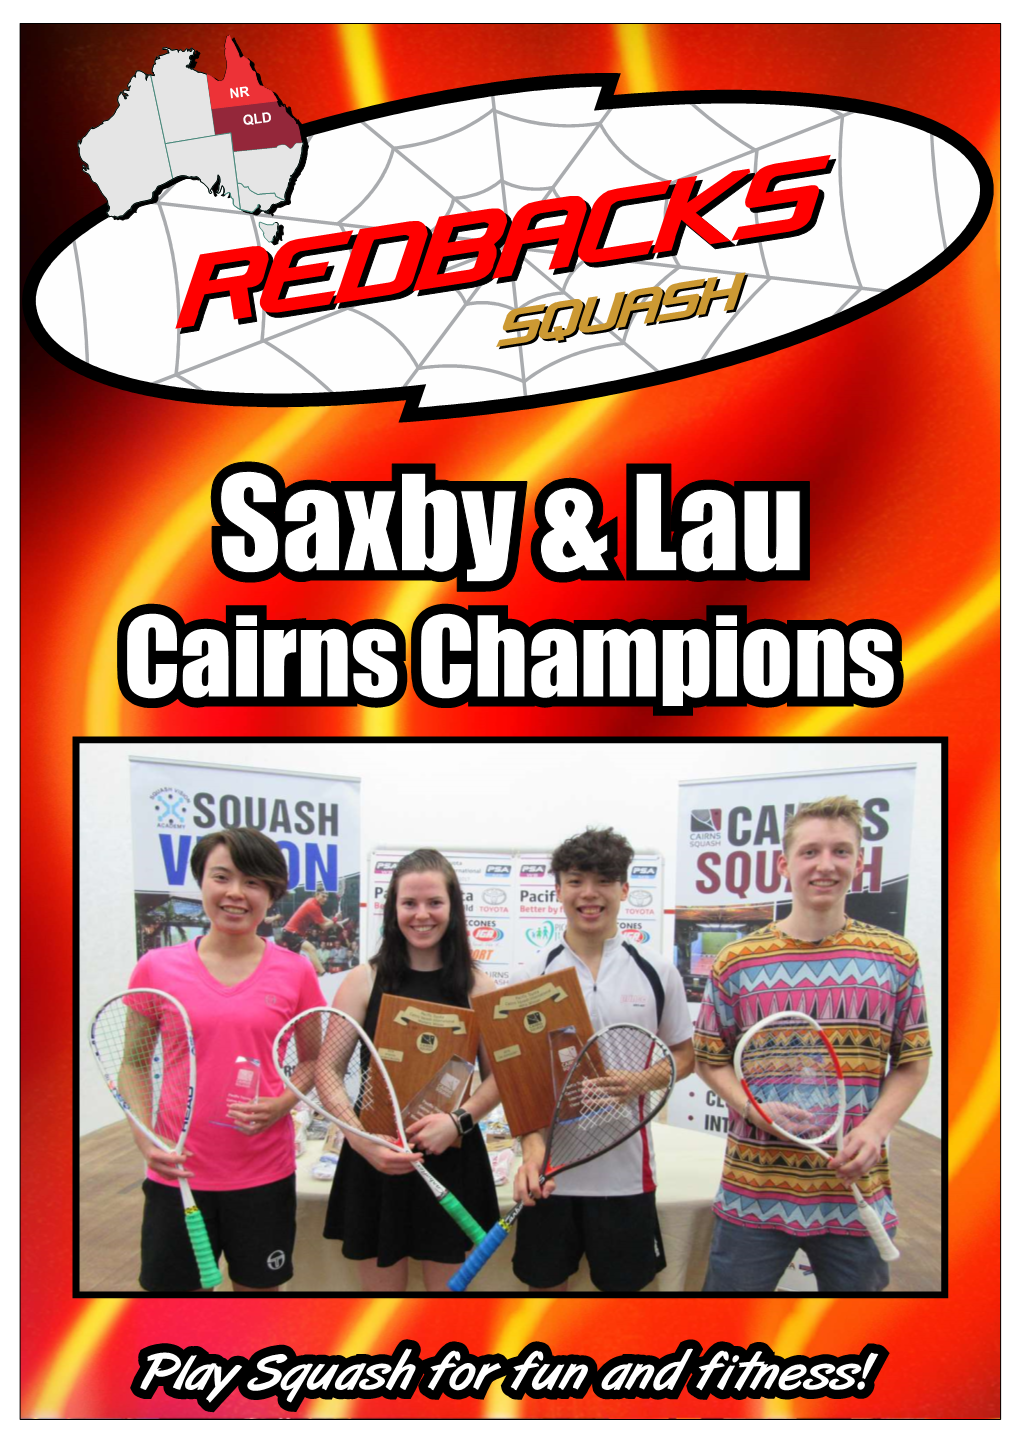 Cairns Champions